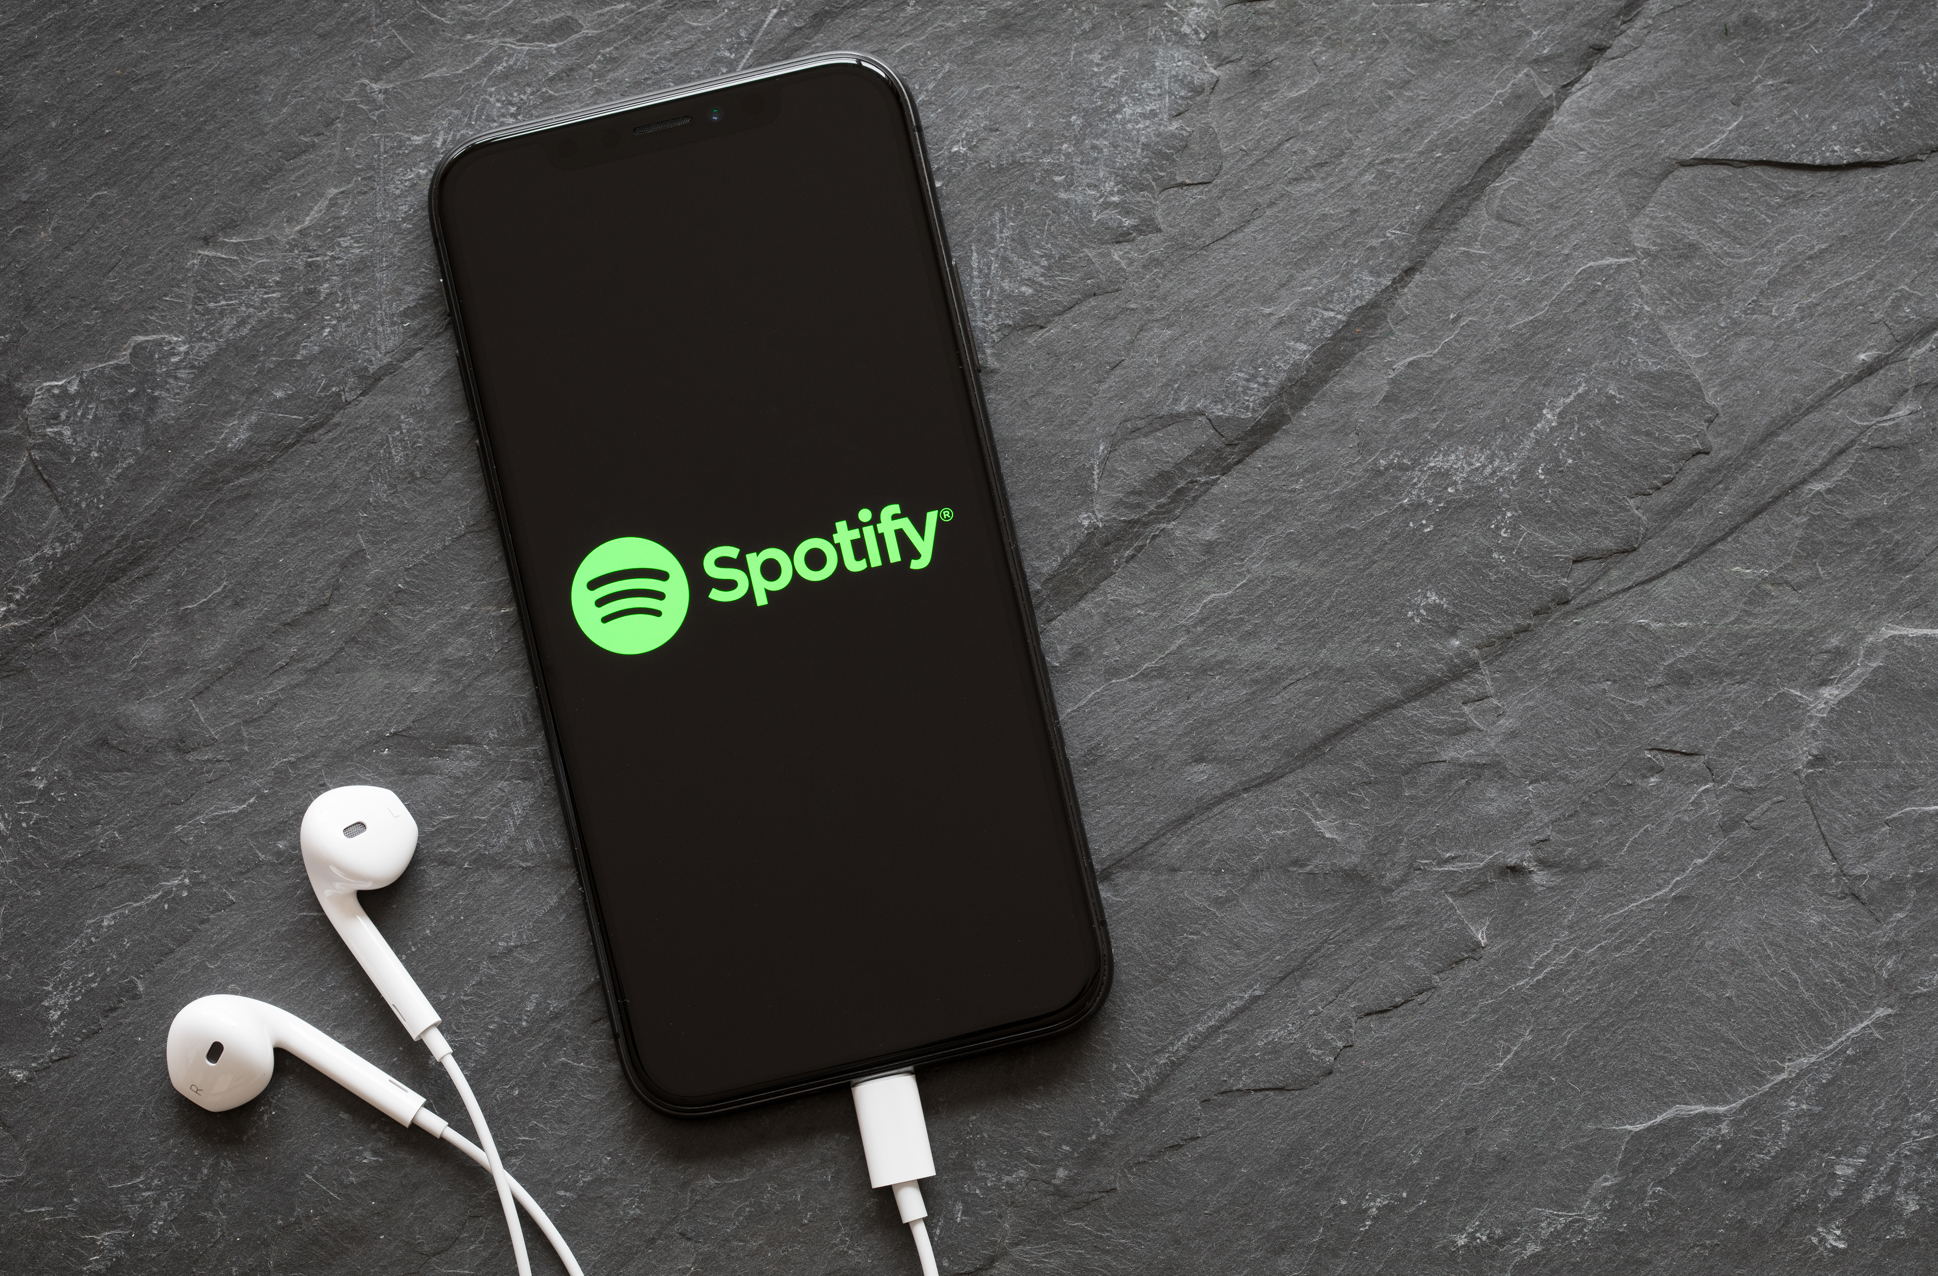 You can now ask Siri to play Spotify music on iOS 13, Spotify